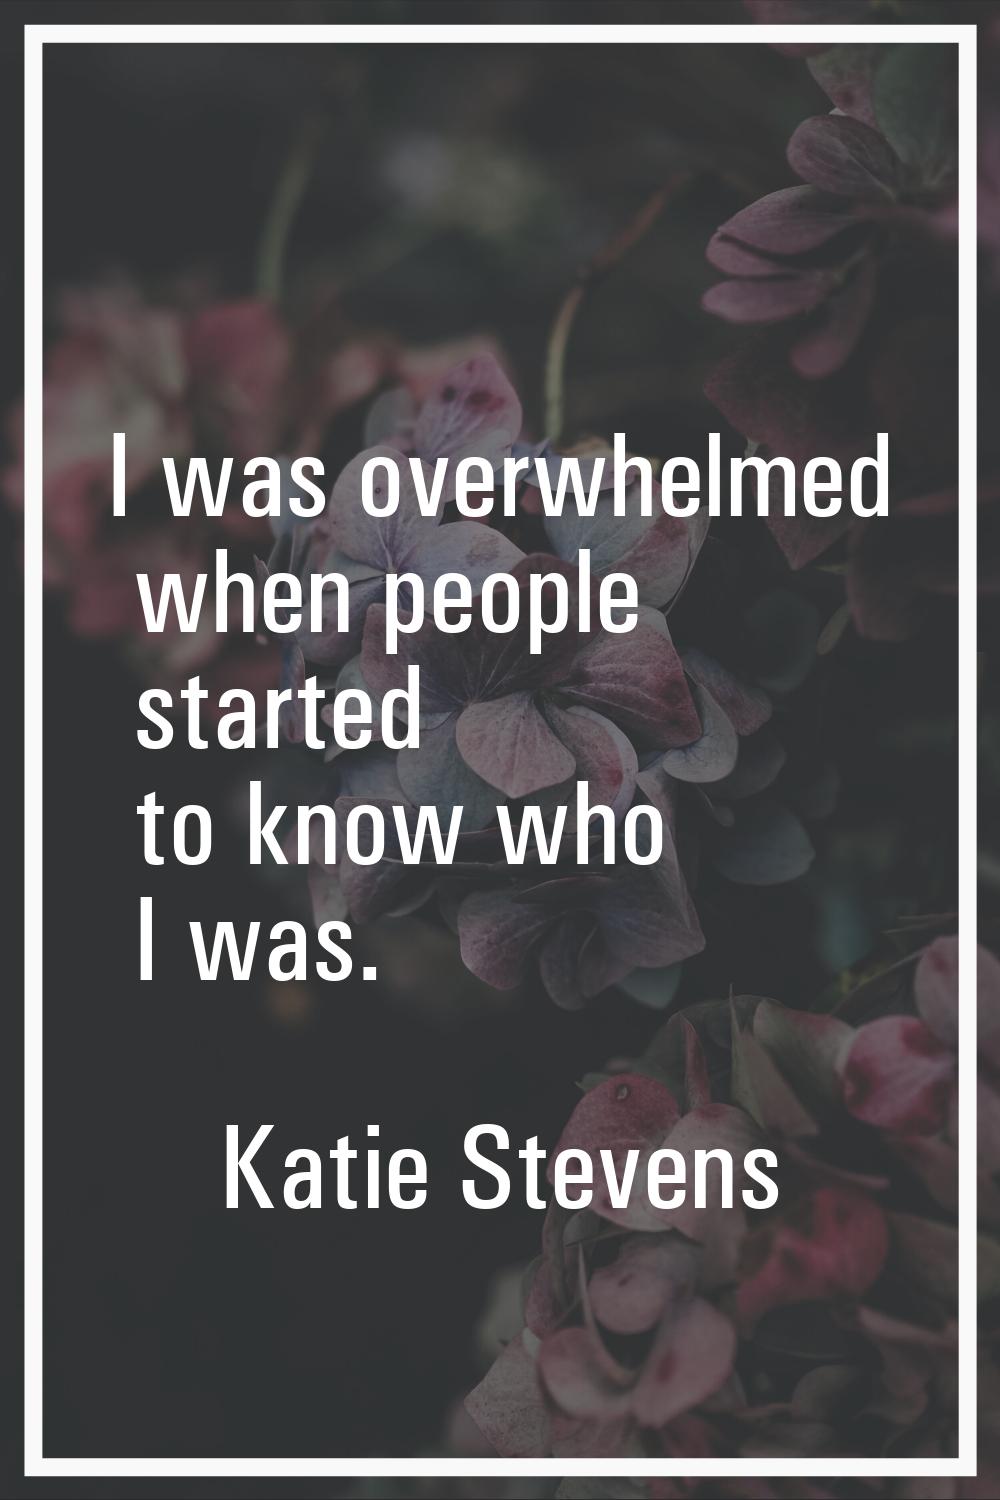 I was overwhelmed when people started to know who I was.